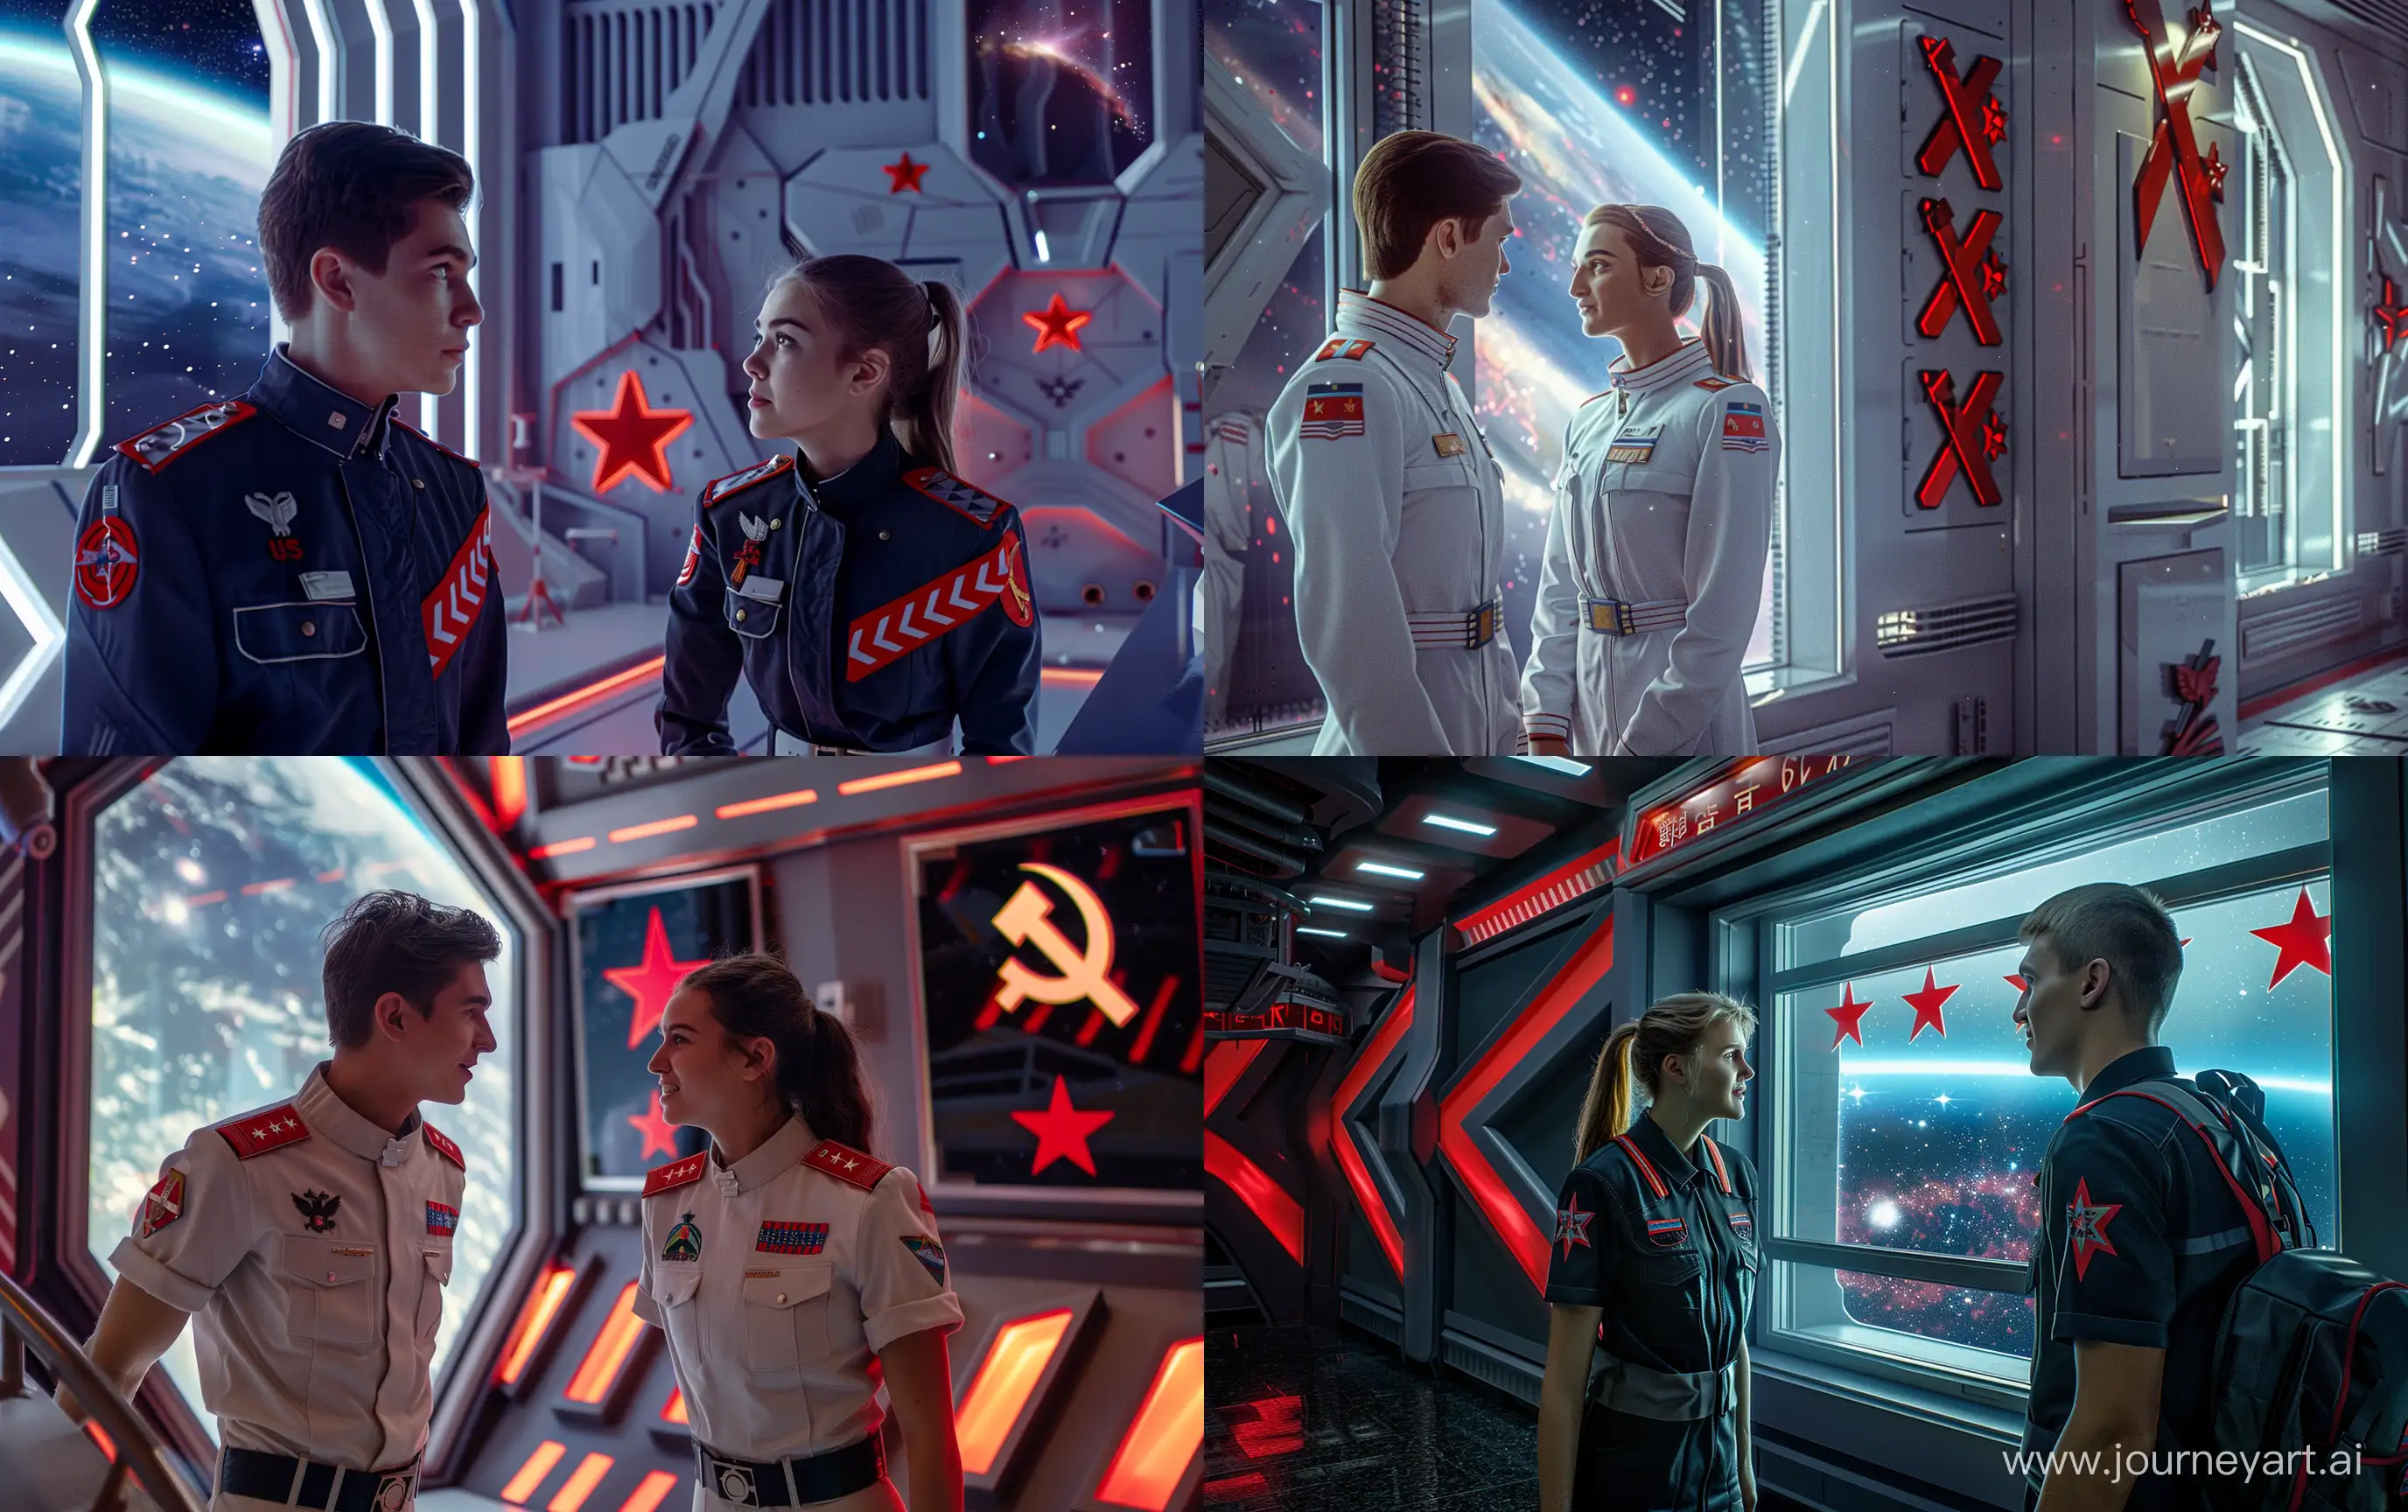 A young man and woman in a space expedition uniform communicate with each other in the large hall of a modern space station, deep space and galaxies are visible in the window, the future, red stars on chevrons, symbols of the USSR in the distance on the wall, super realistic, kodak 35mm, cinematic --ar 16:10